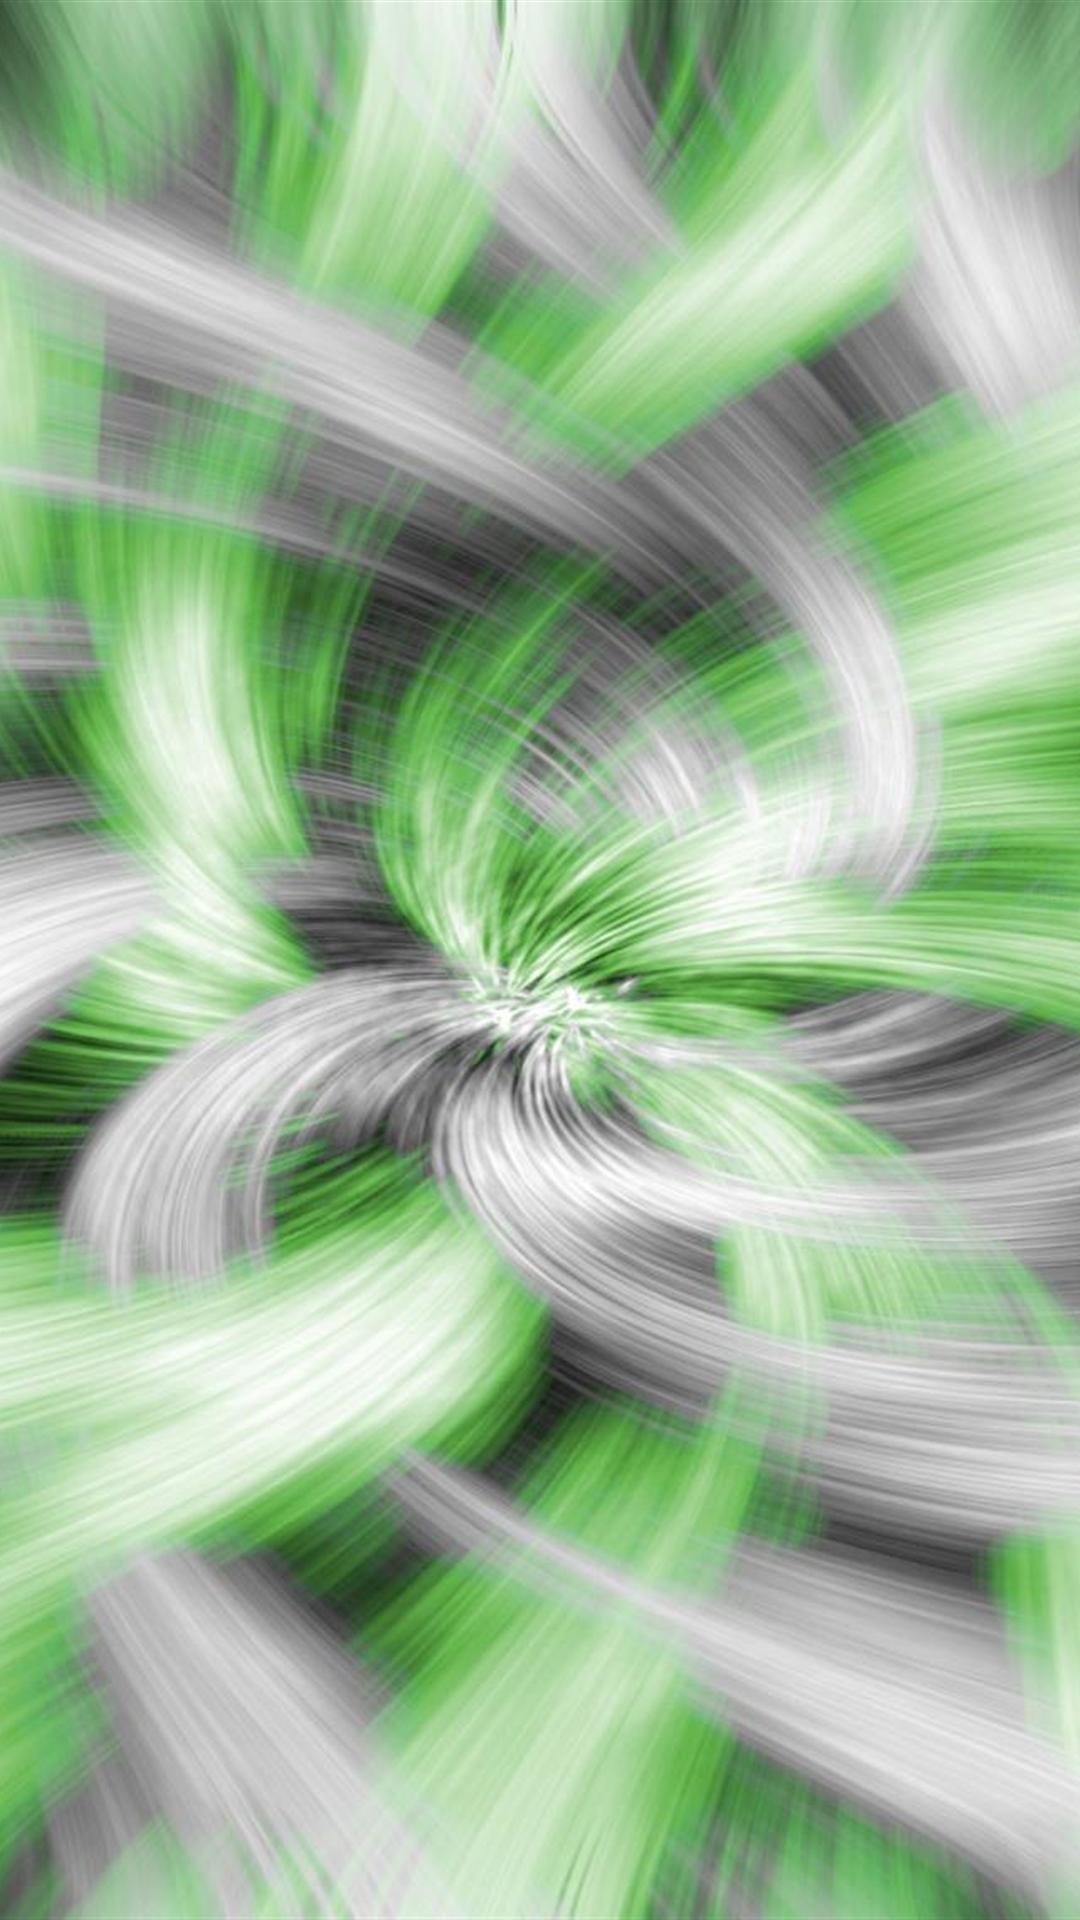 Plus HD Abstraction Green White iPhone Wallpaper